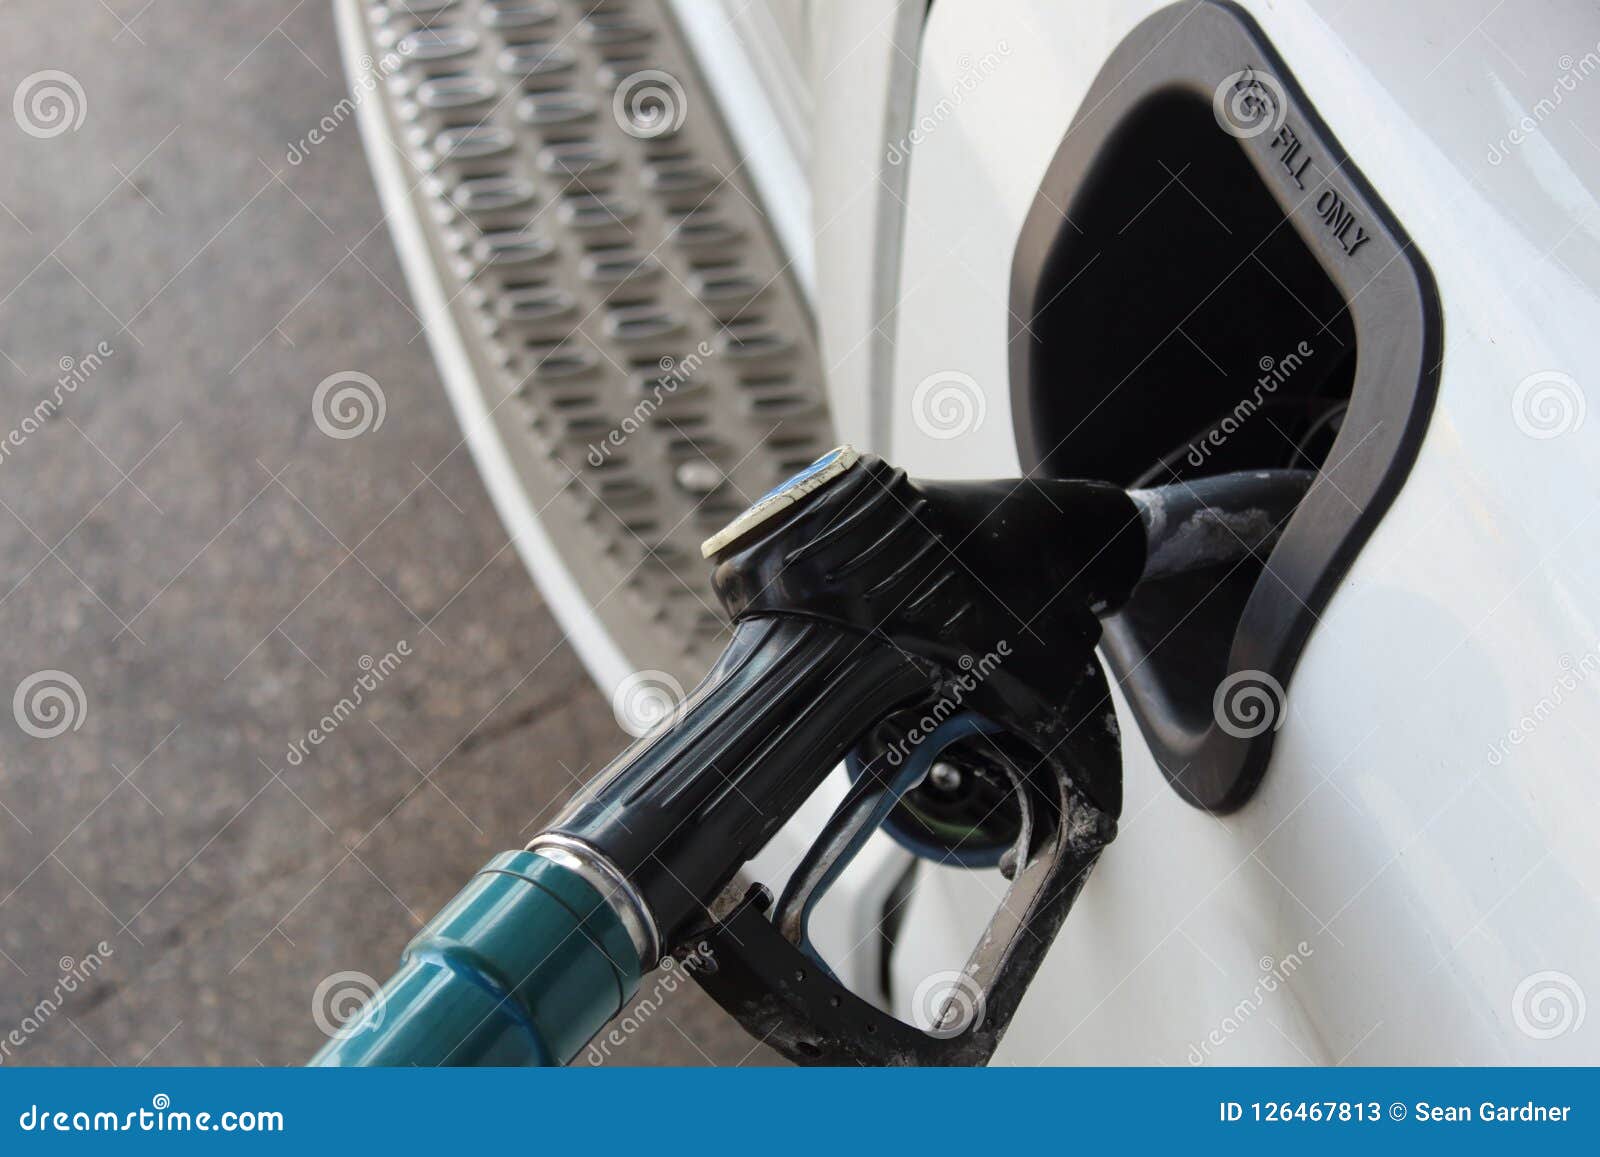 Fueling A Semi Truck At The Truck Stop Stock Image - Image of stop, trucking: 126467813